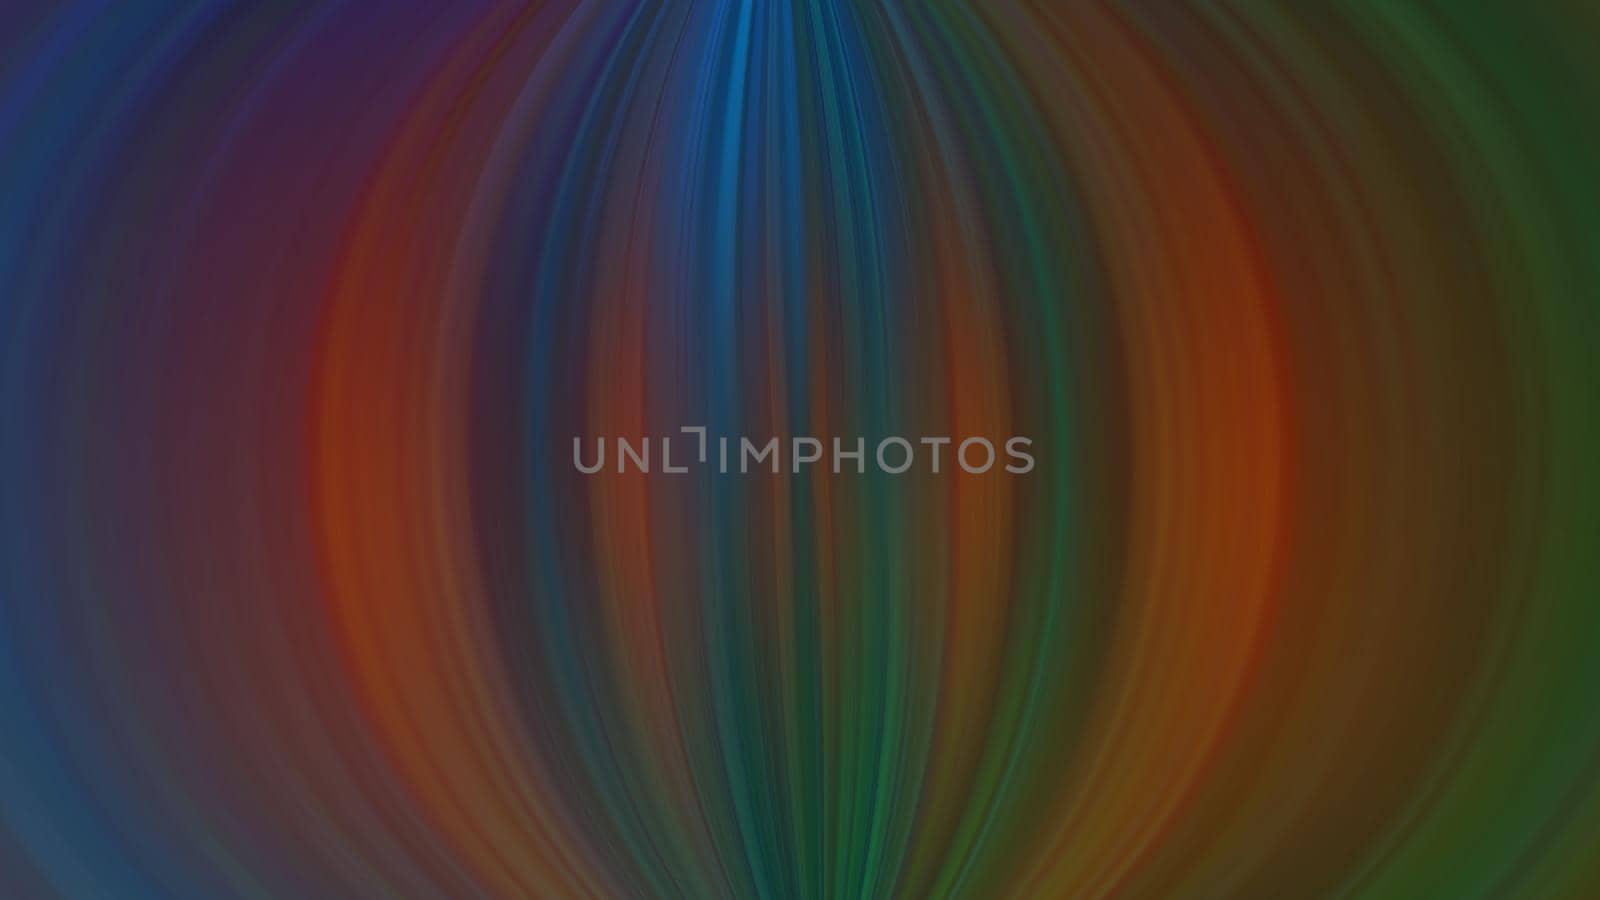 Abstract linear blue gradient background. Image and design.